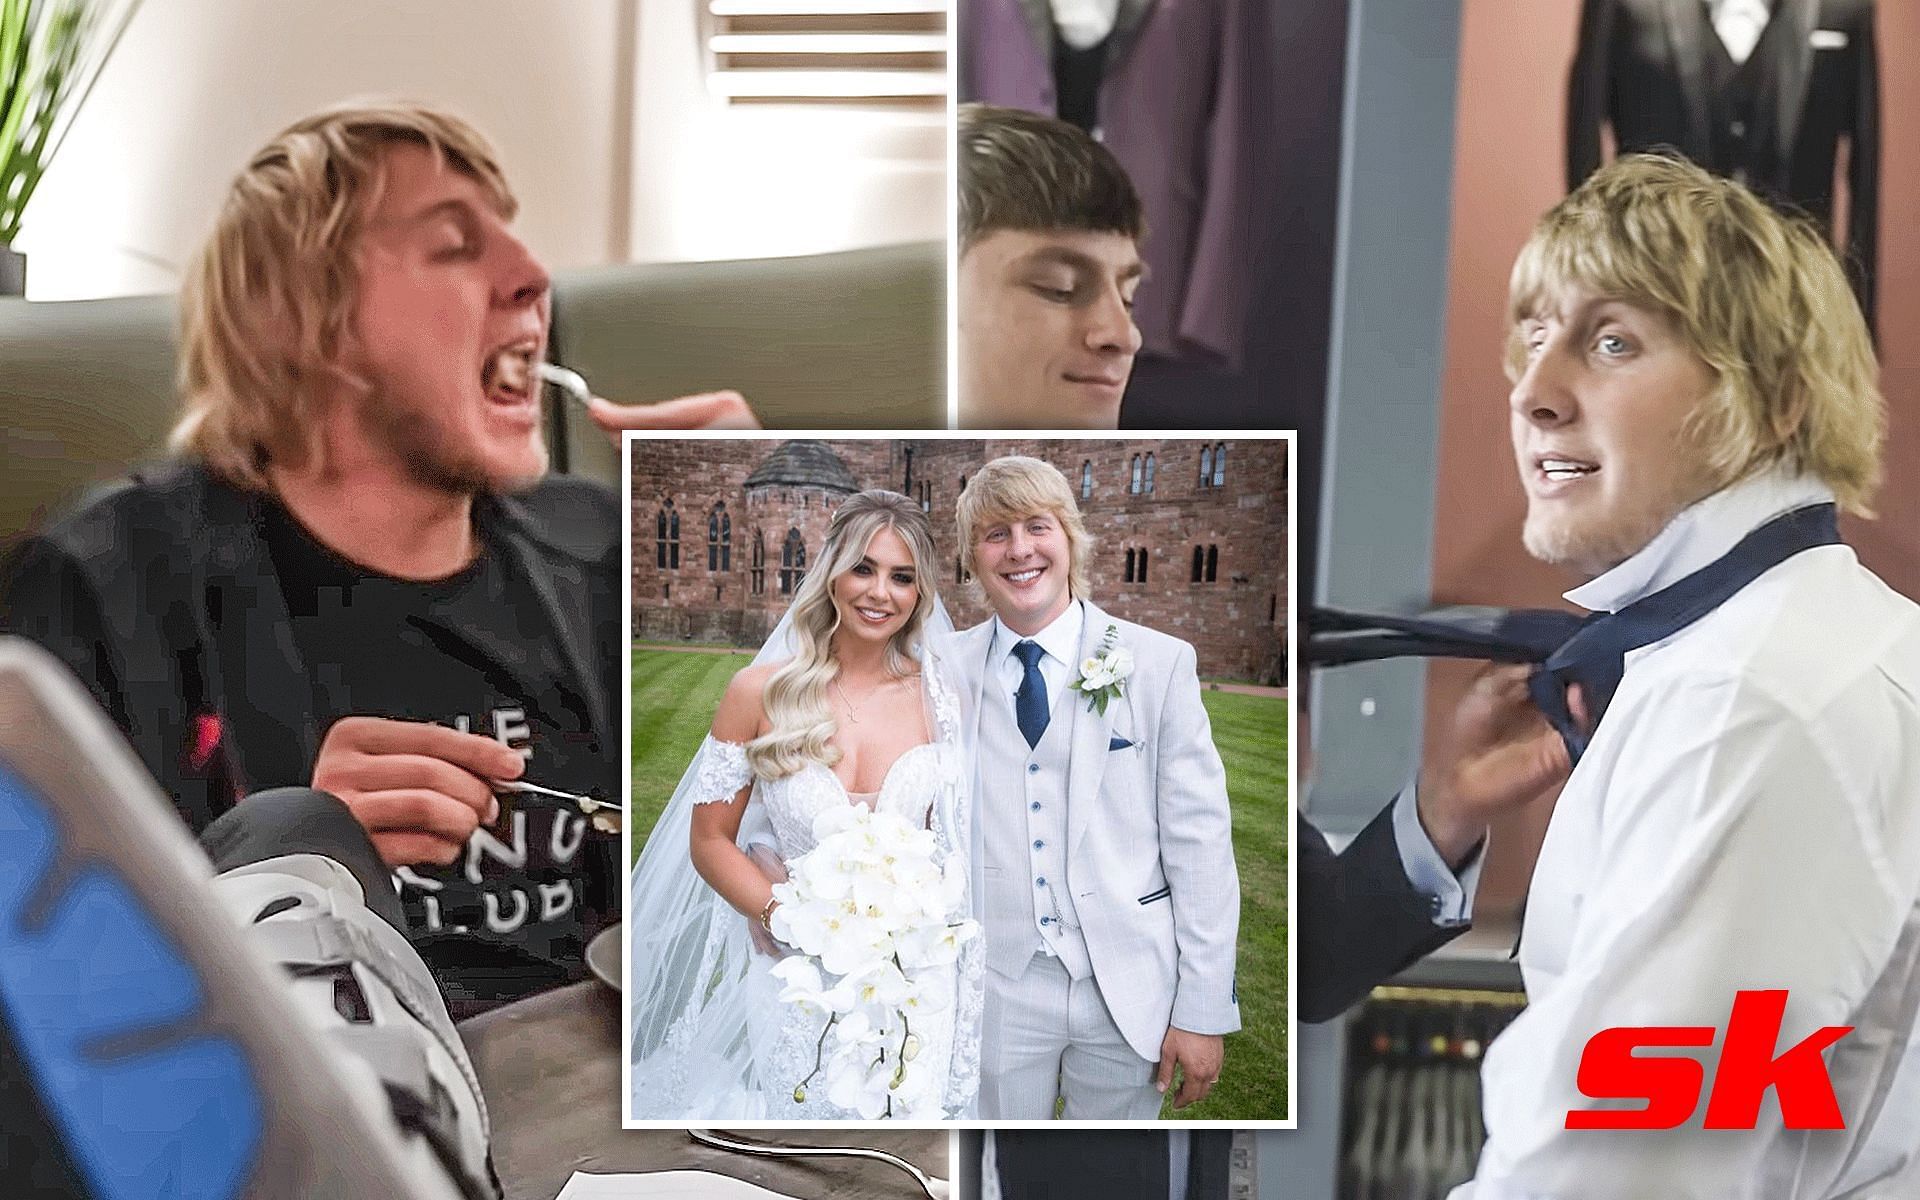 Paddy Pimblett wedding: [Images via: Paddy the Baddy| YouTube and @theufcbaddy on Instagram]